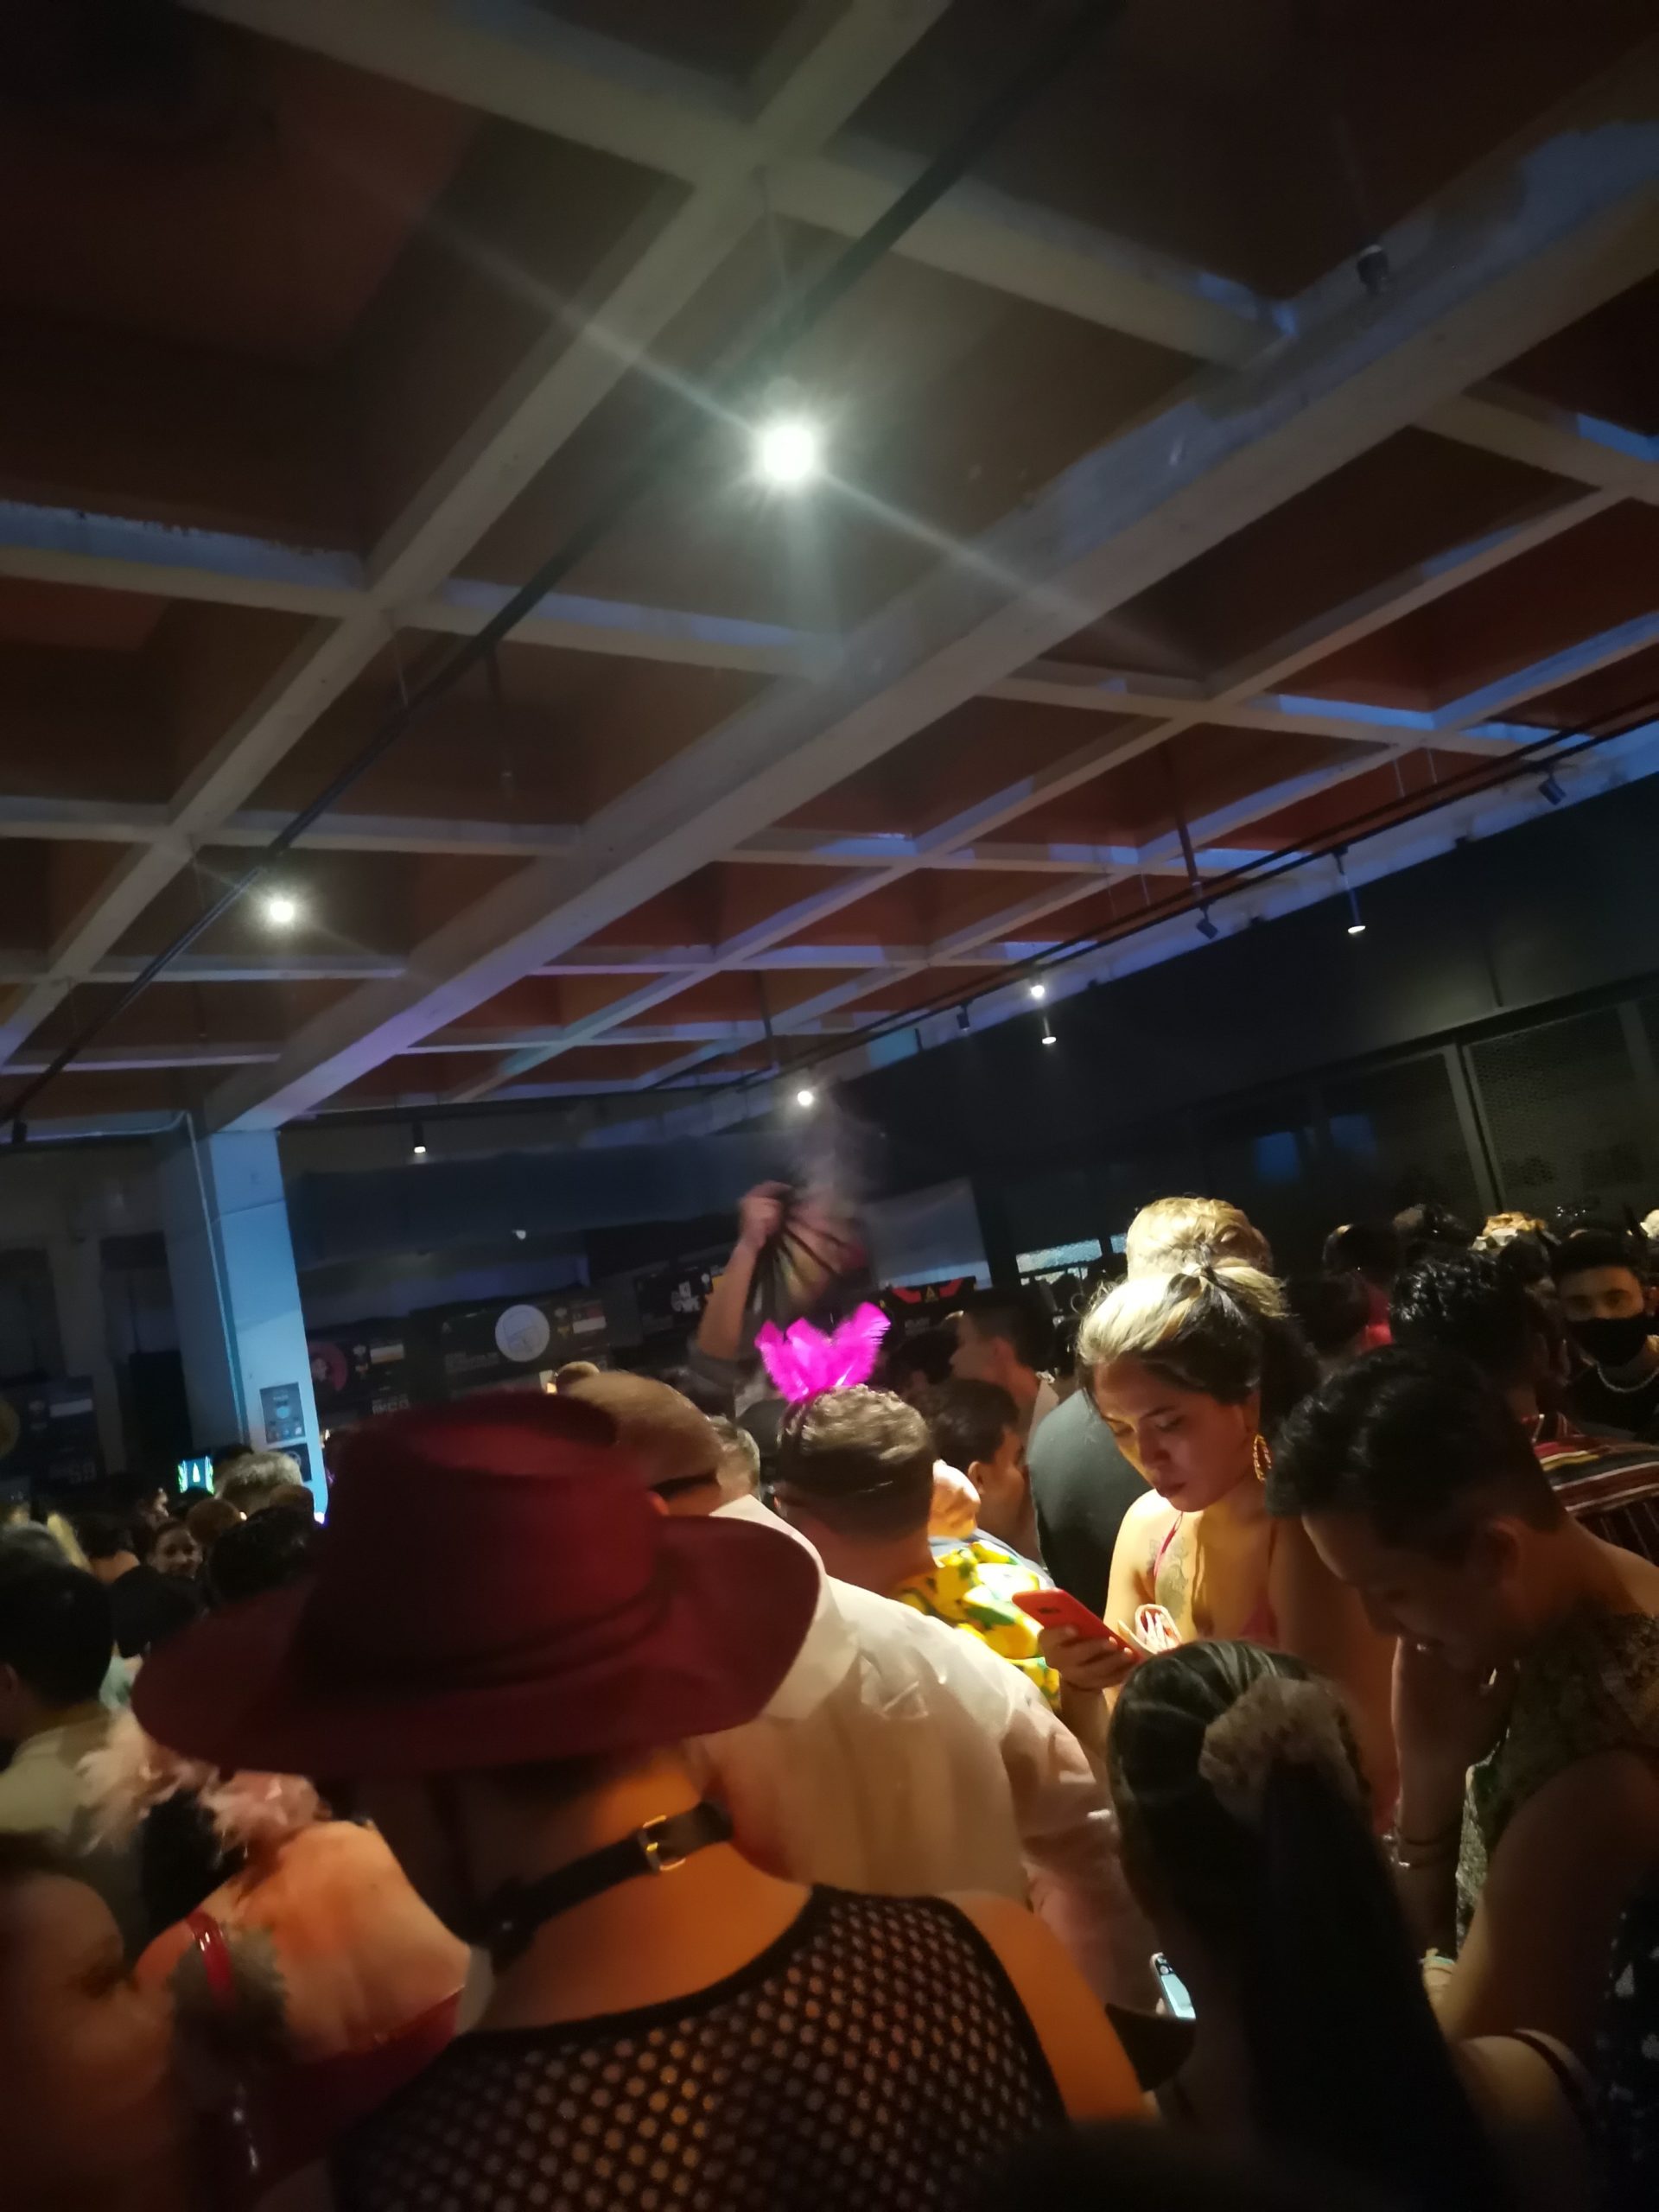 Partygoers left stranded at rexkl